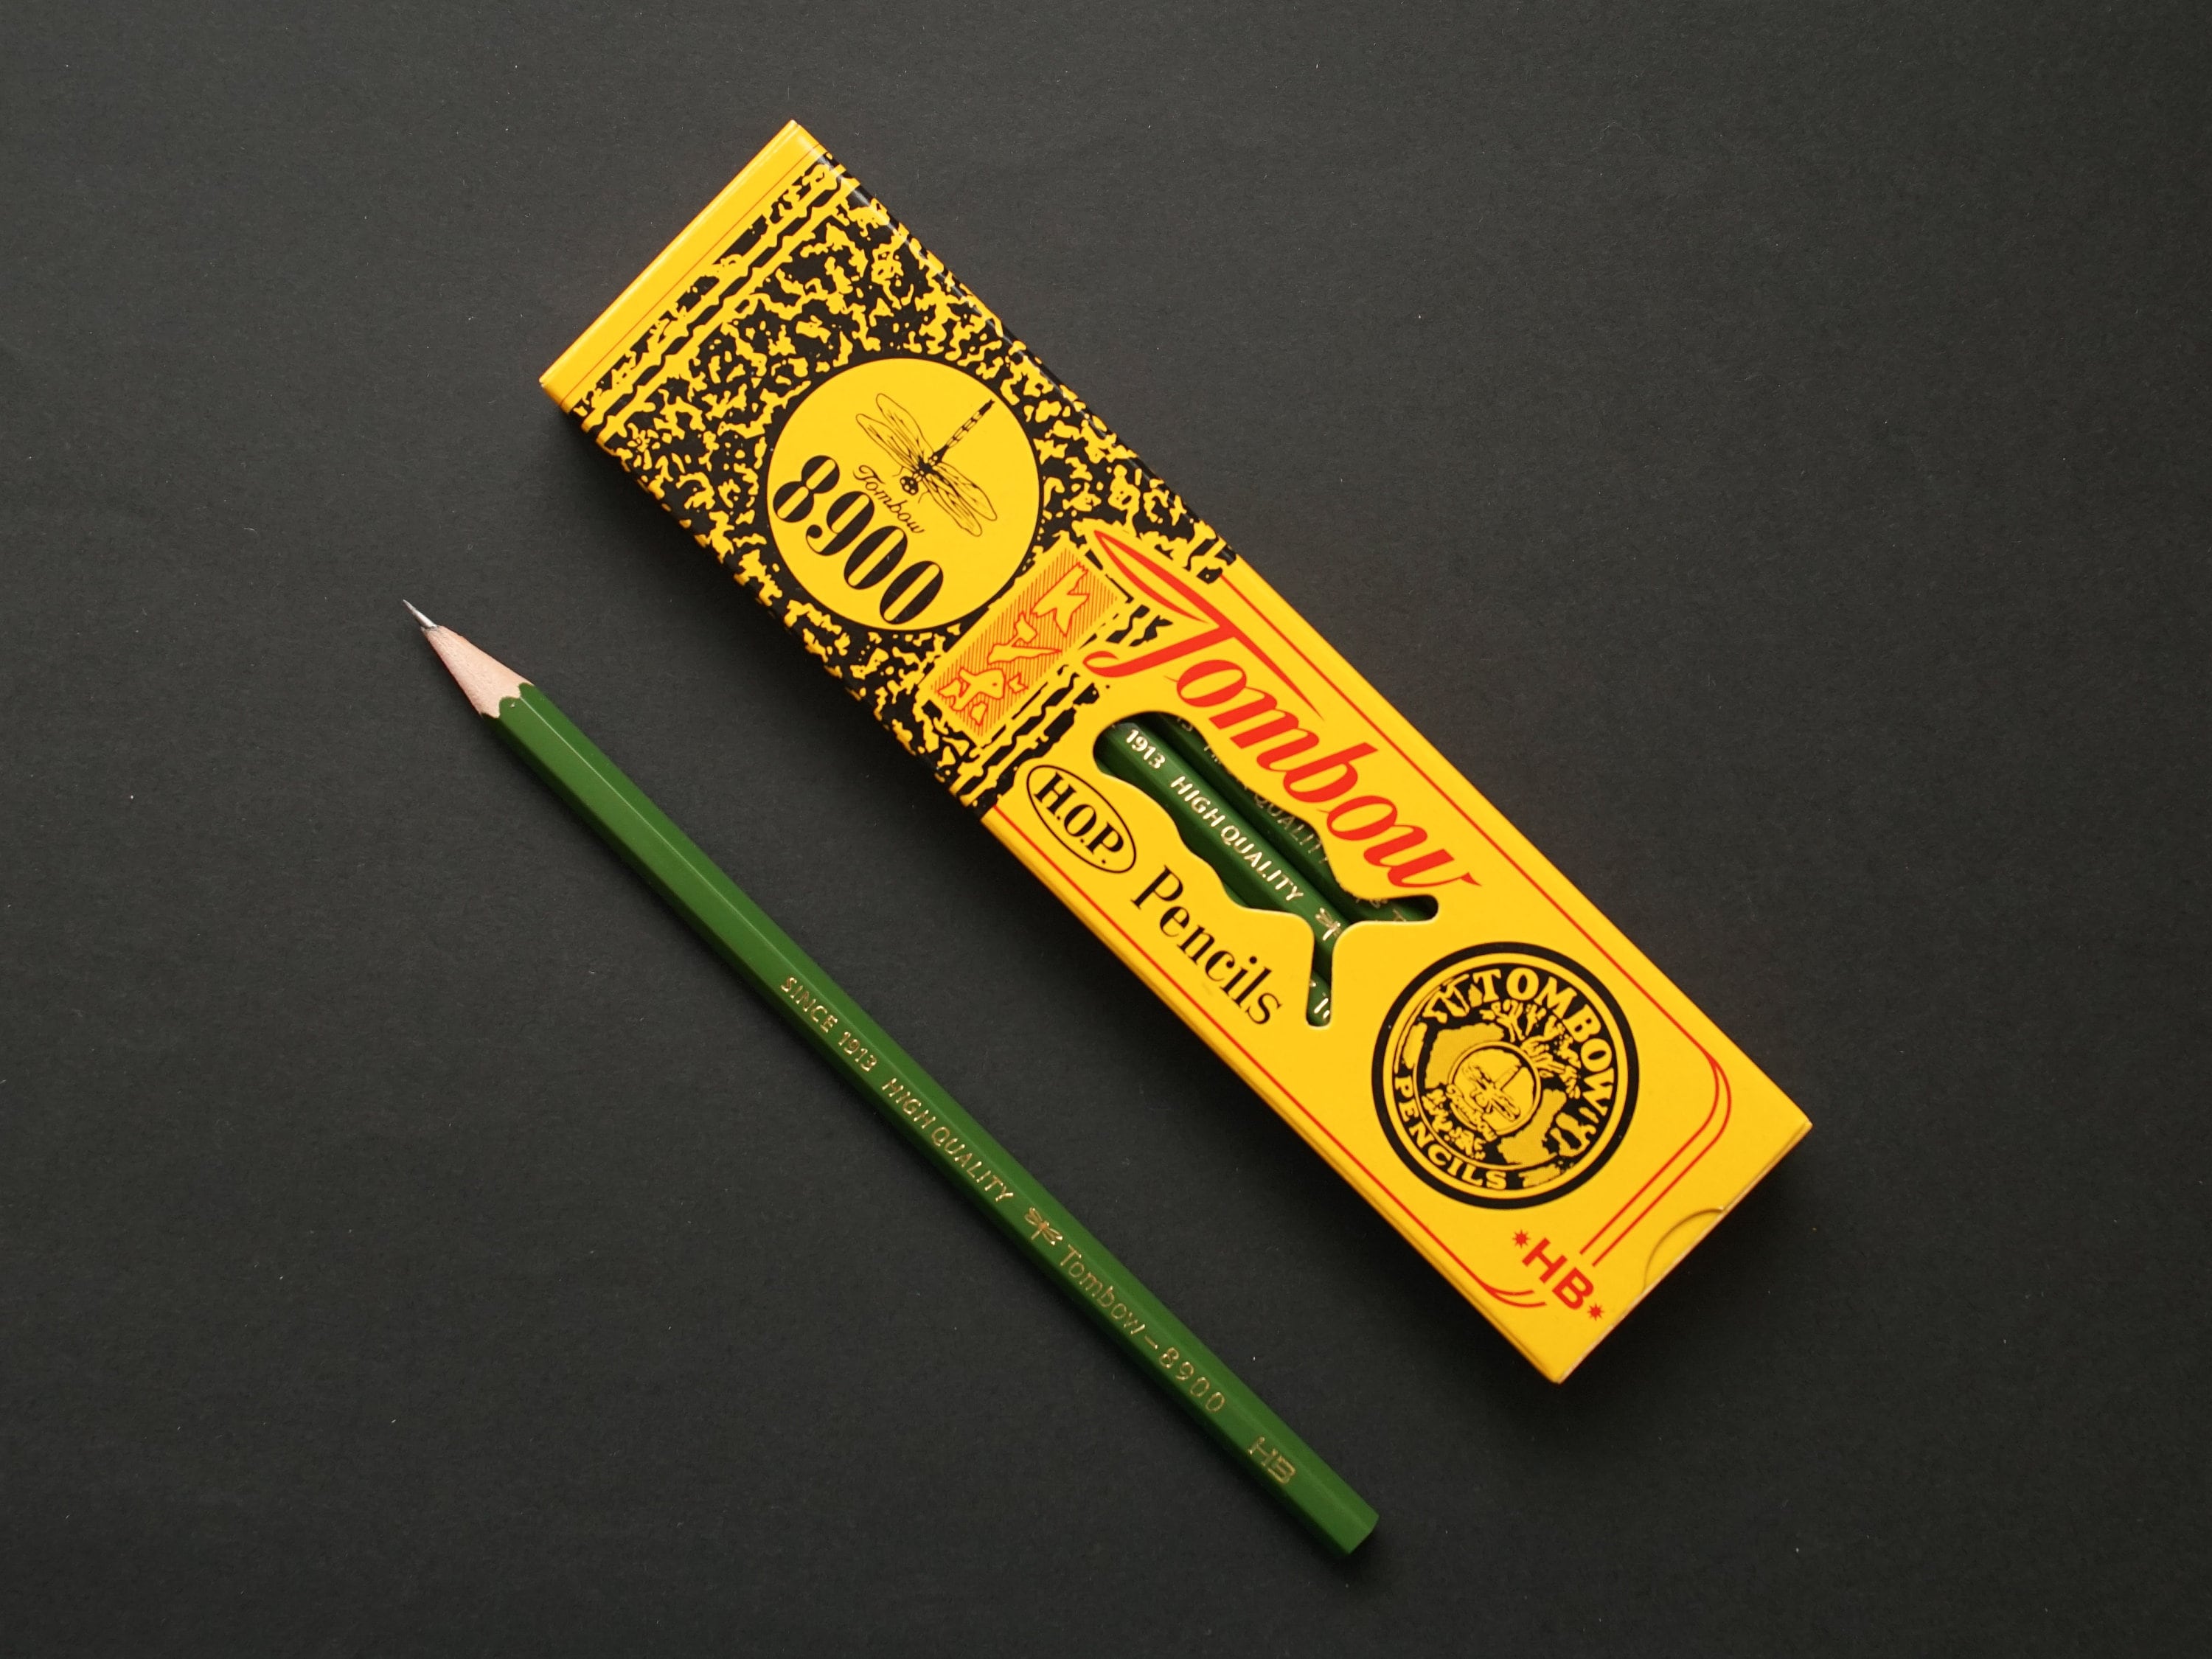 16 VINTAGE PENCILS: TOMBOW PENCIL CO., LTD +BOX - MADE IN JAPAN